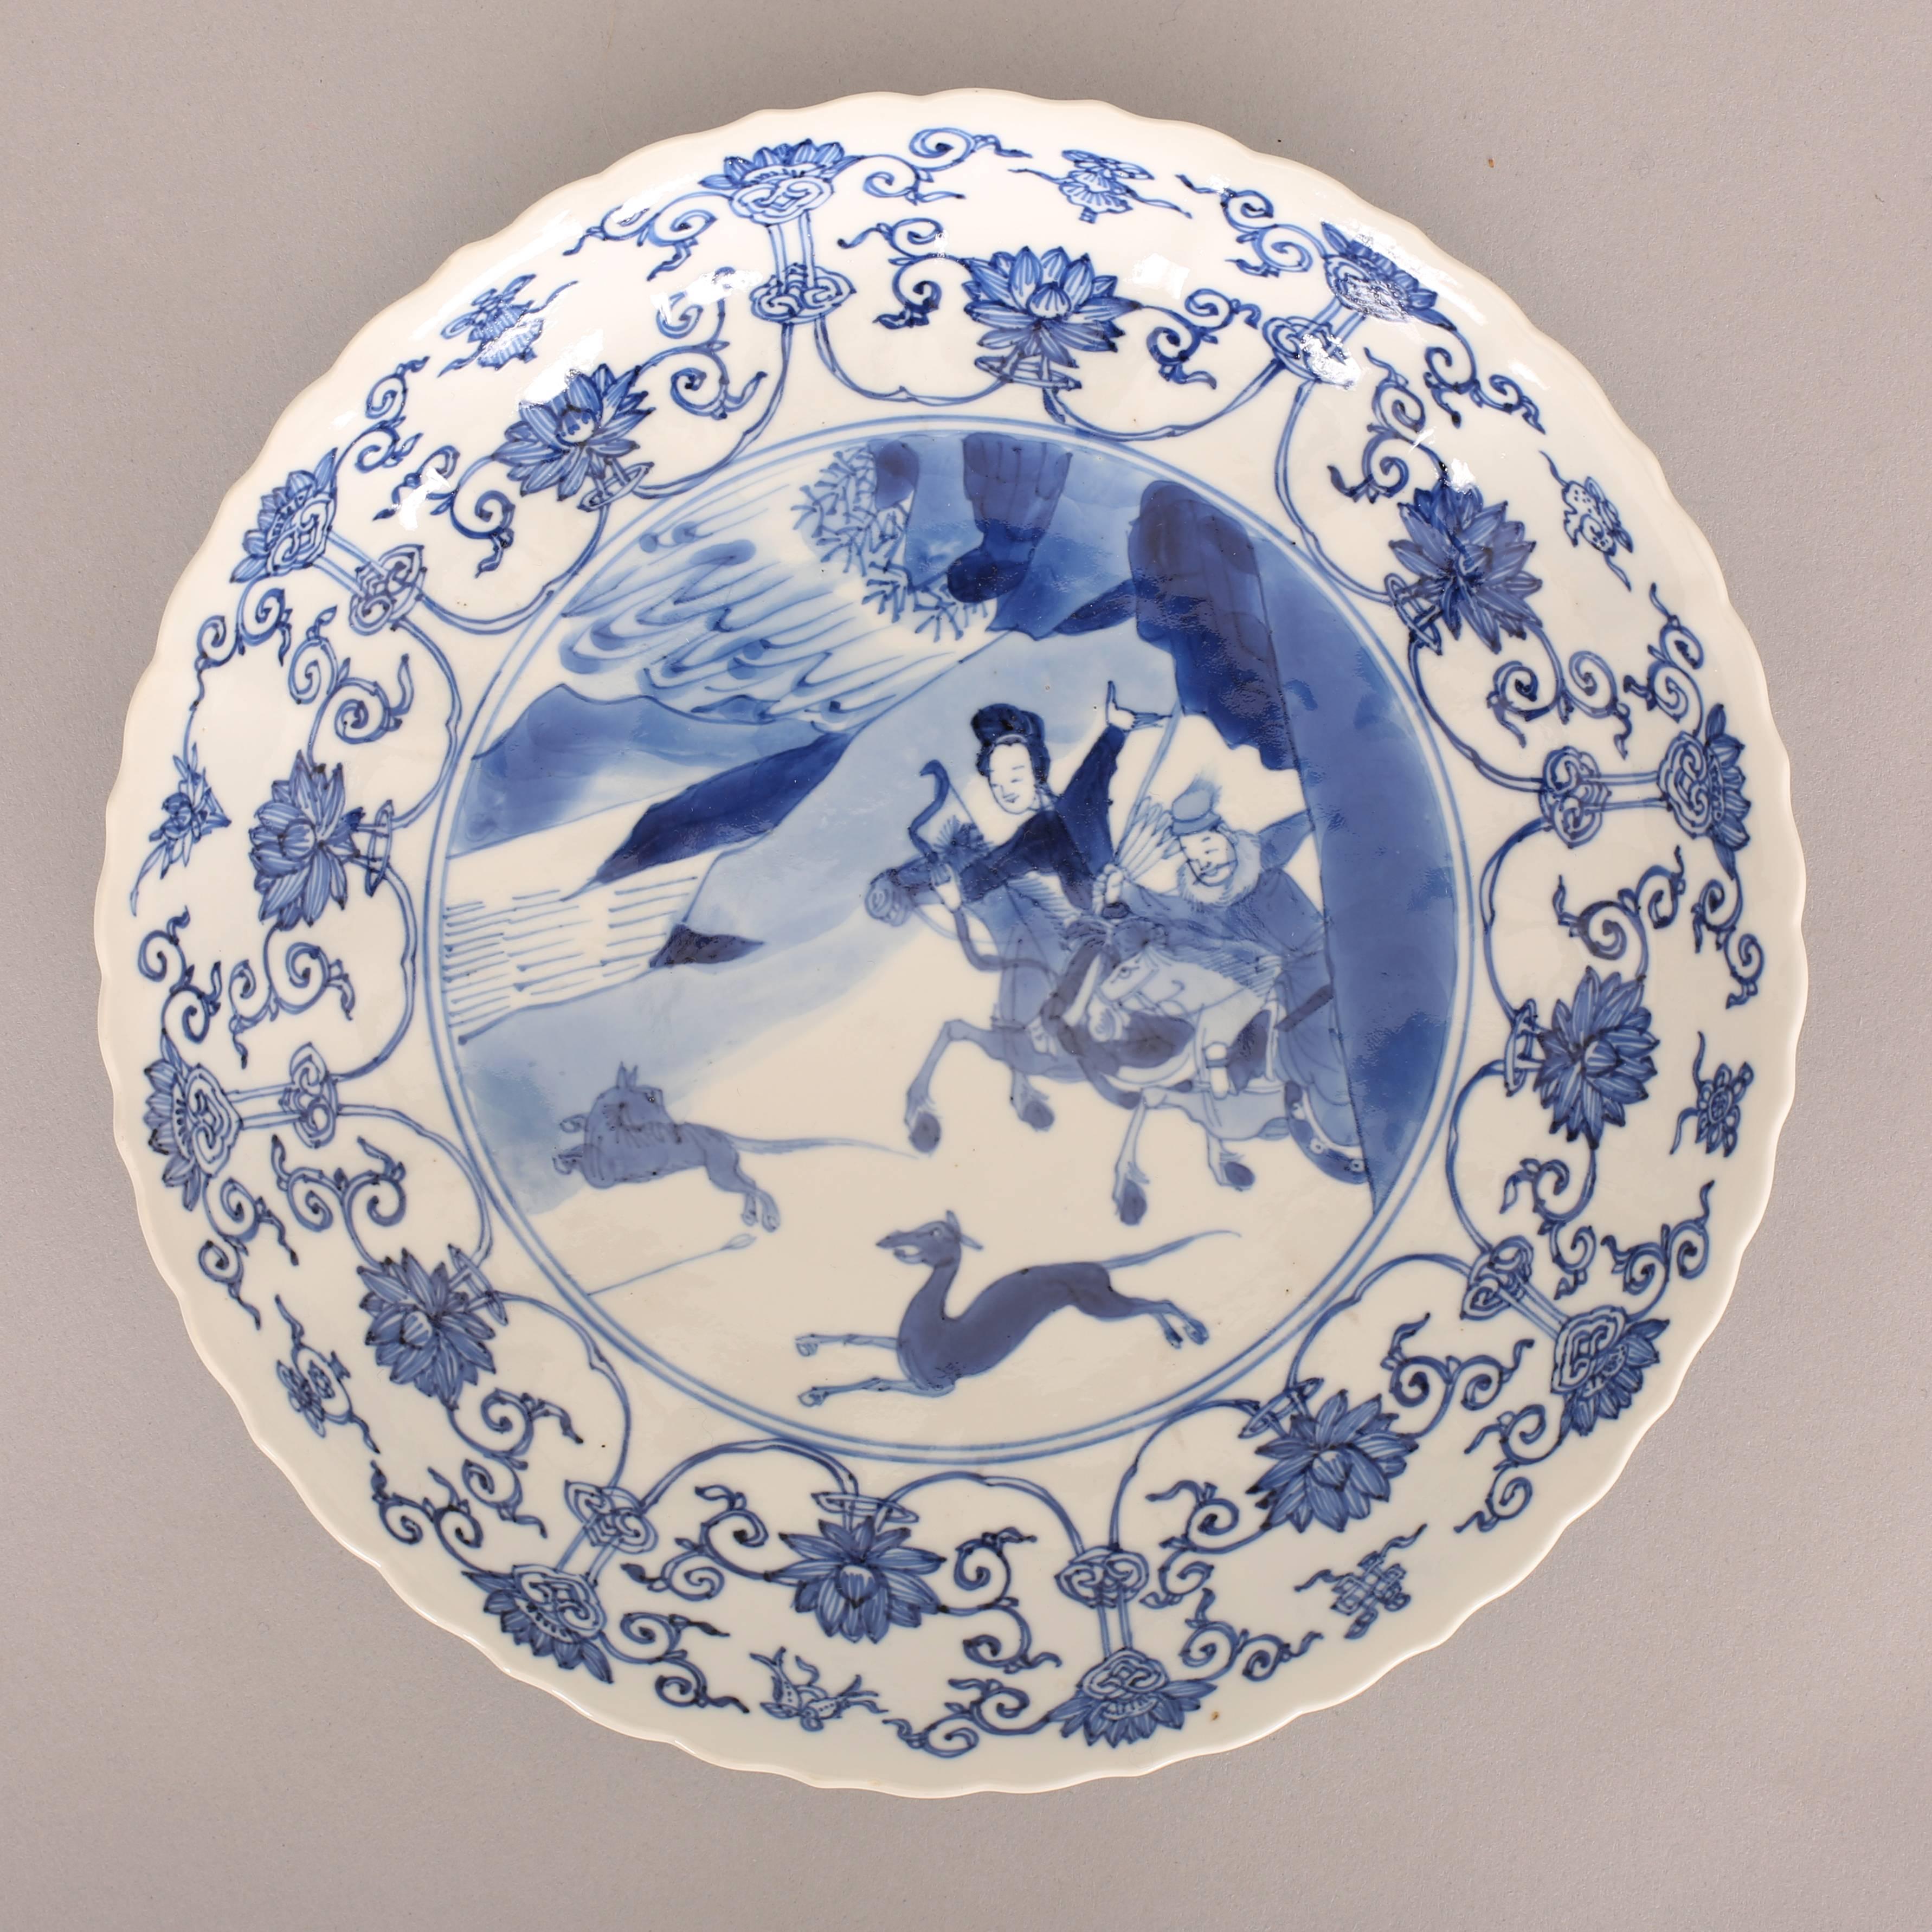 Painted Chinese Porcelain Blue and White Saucer Dish with Hunting Scene, 17th Century For Sale